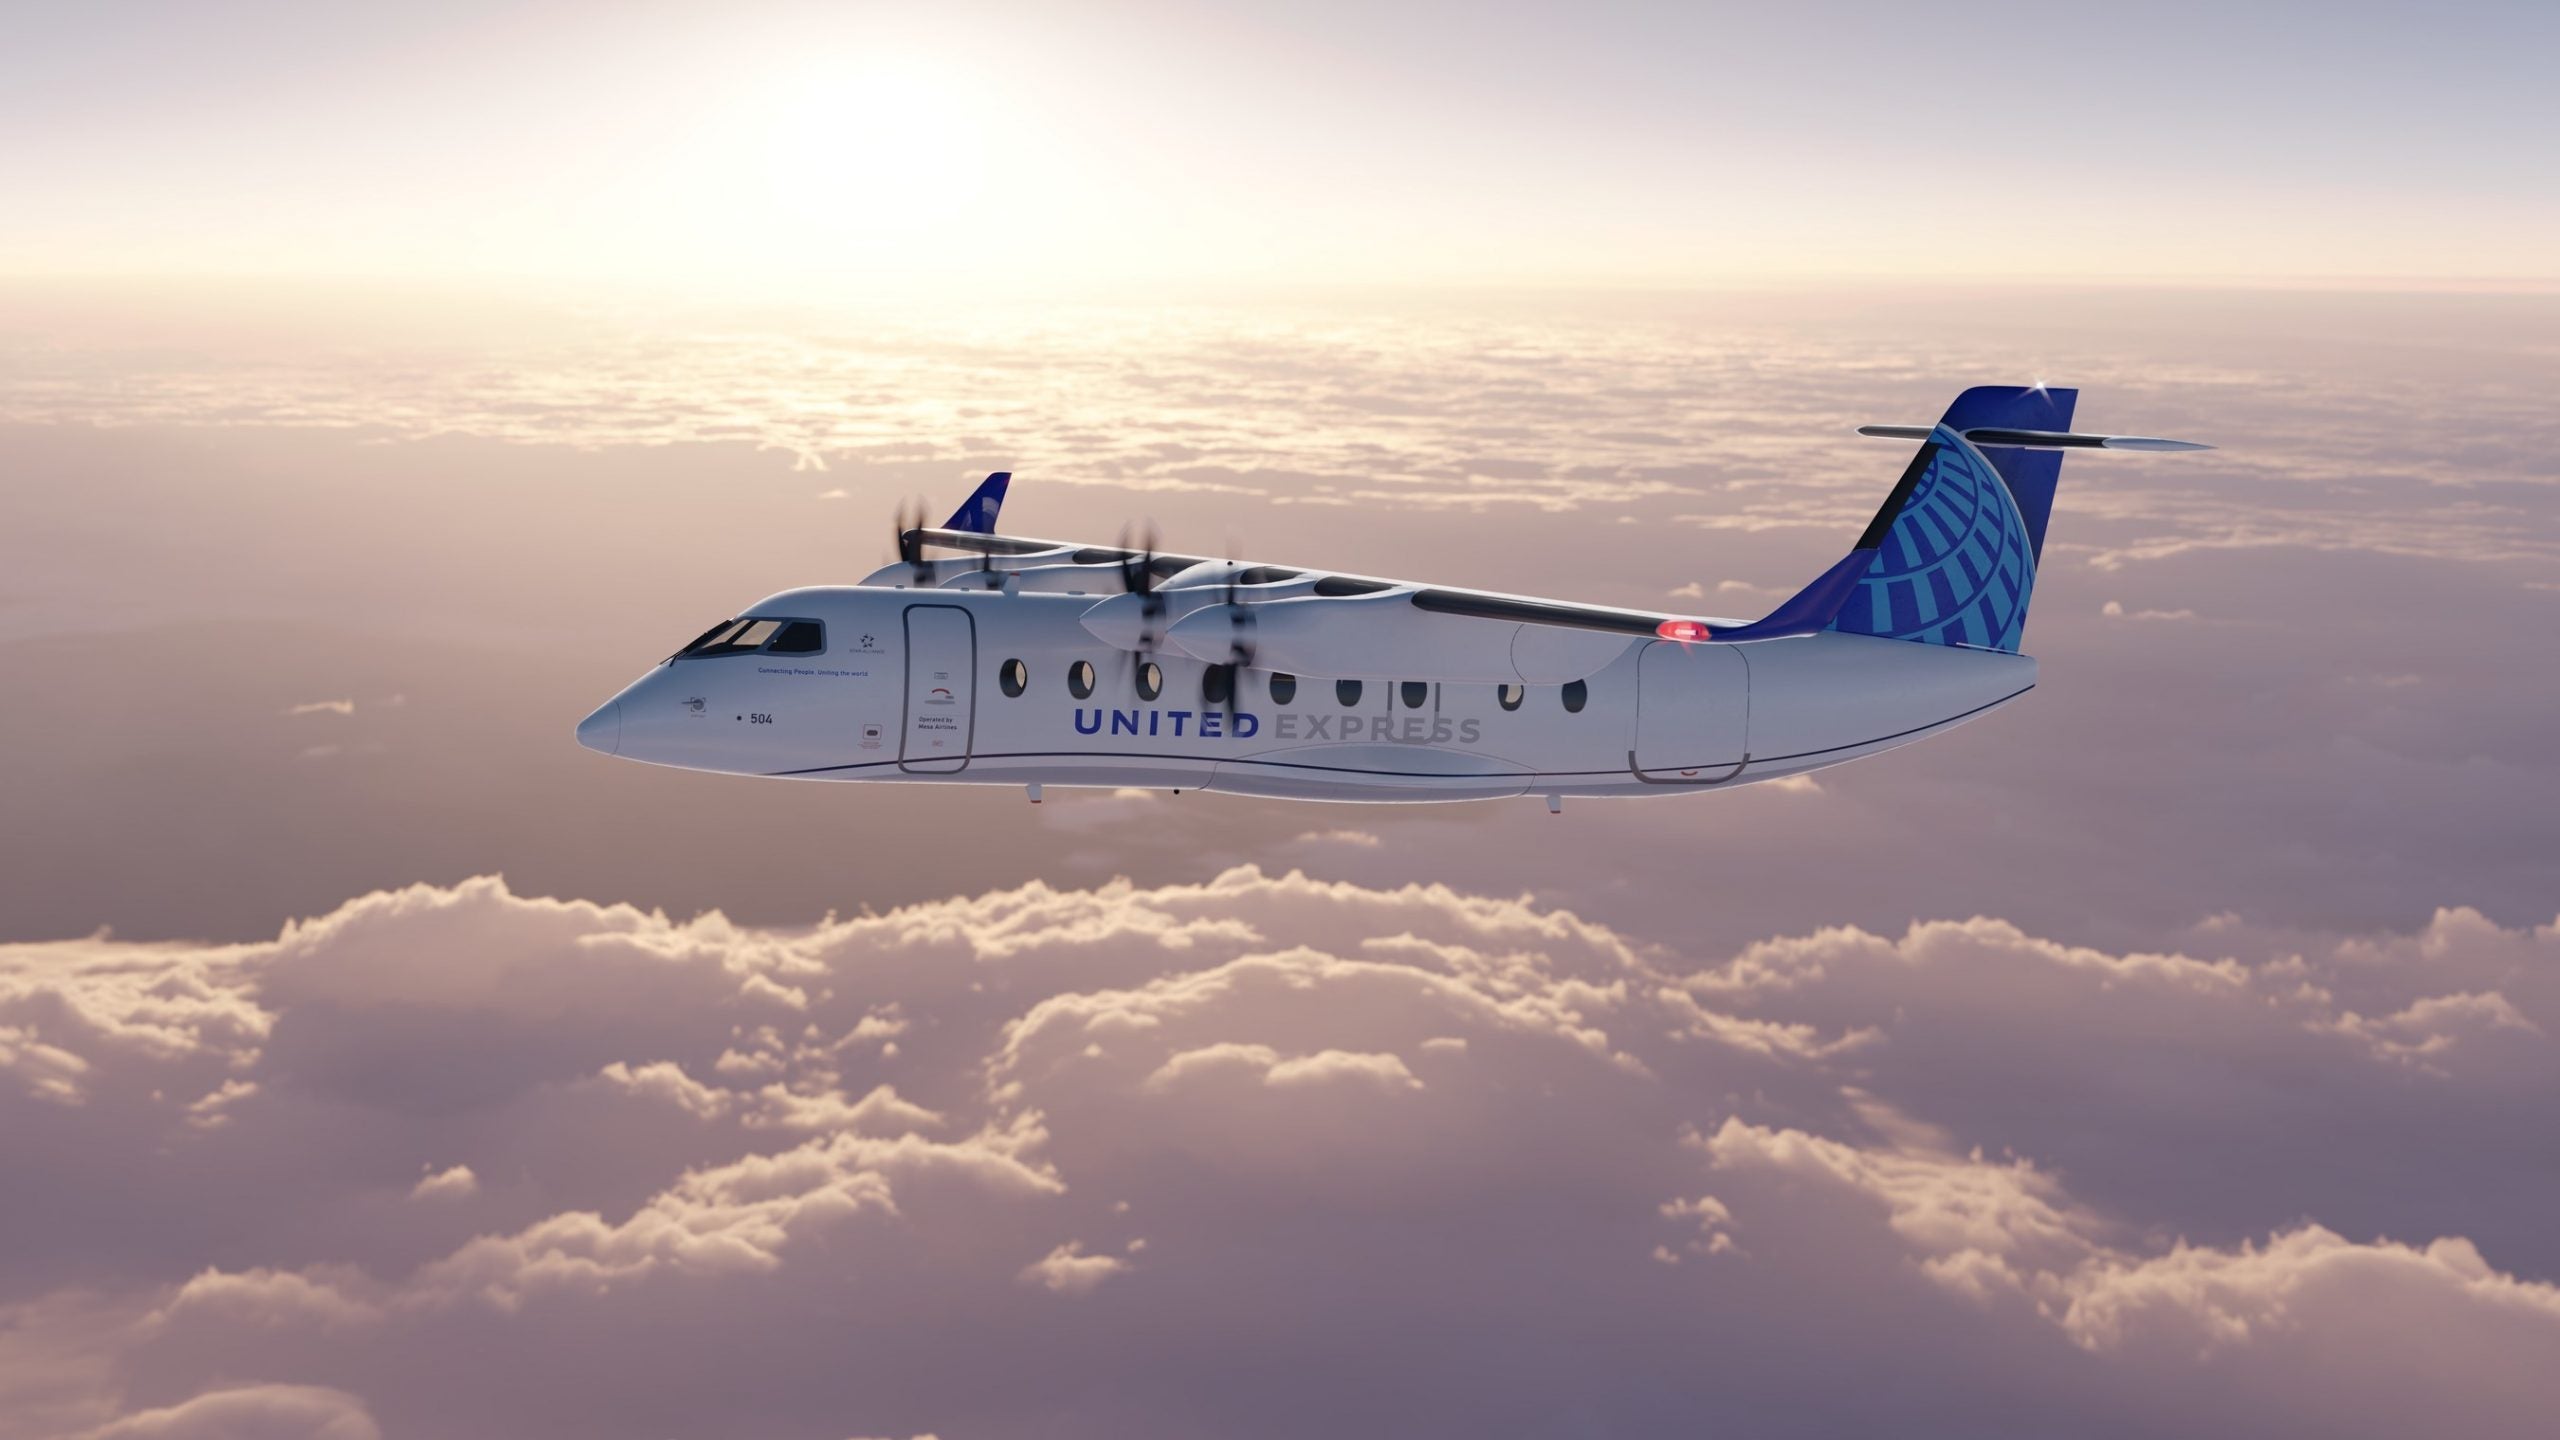 A rendering of a Heart Aerospace ES-19 electric turboprop plane in United Airlines livery.